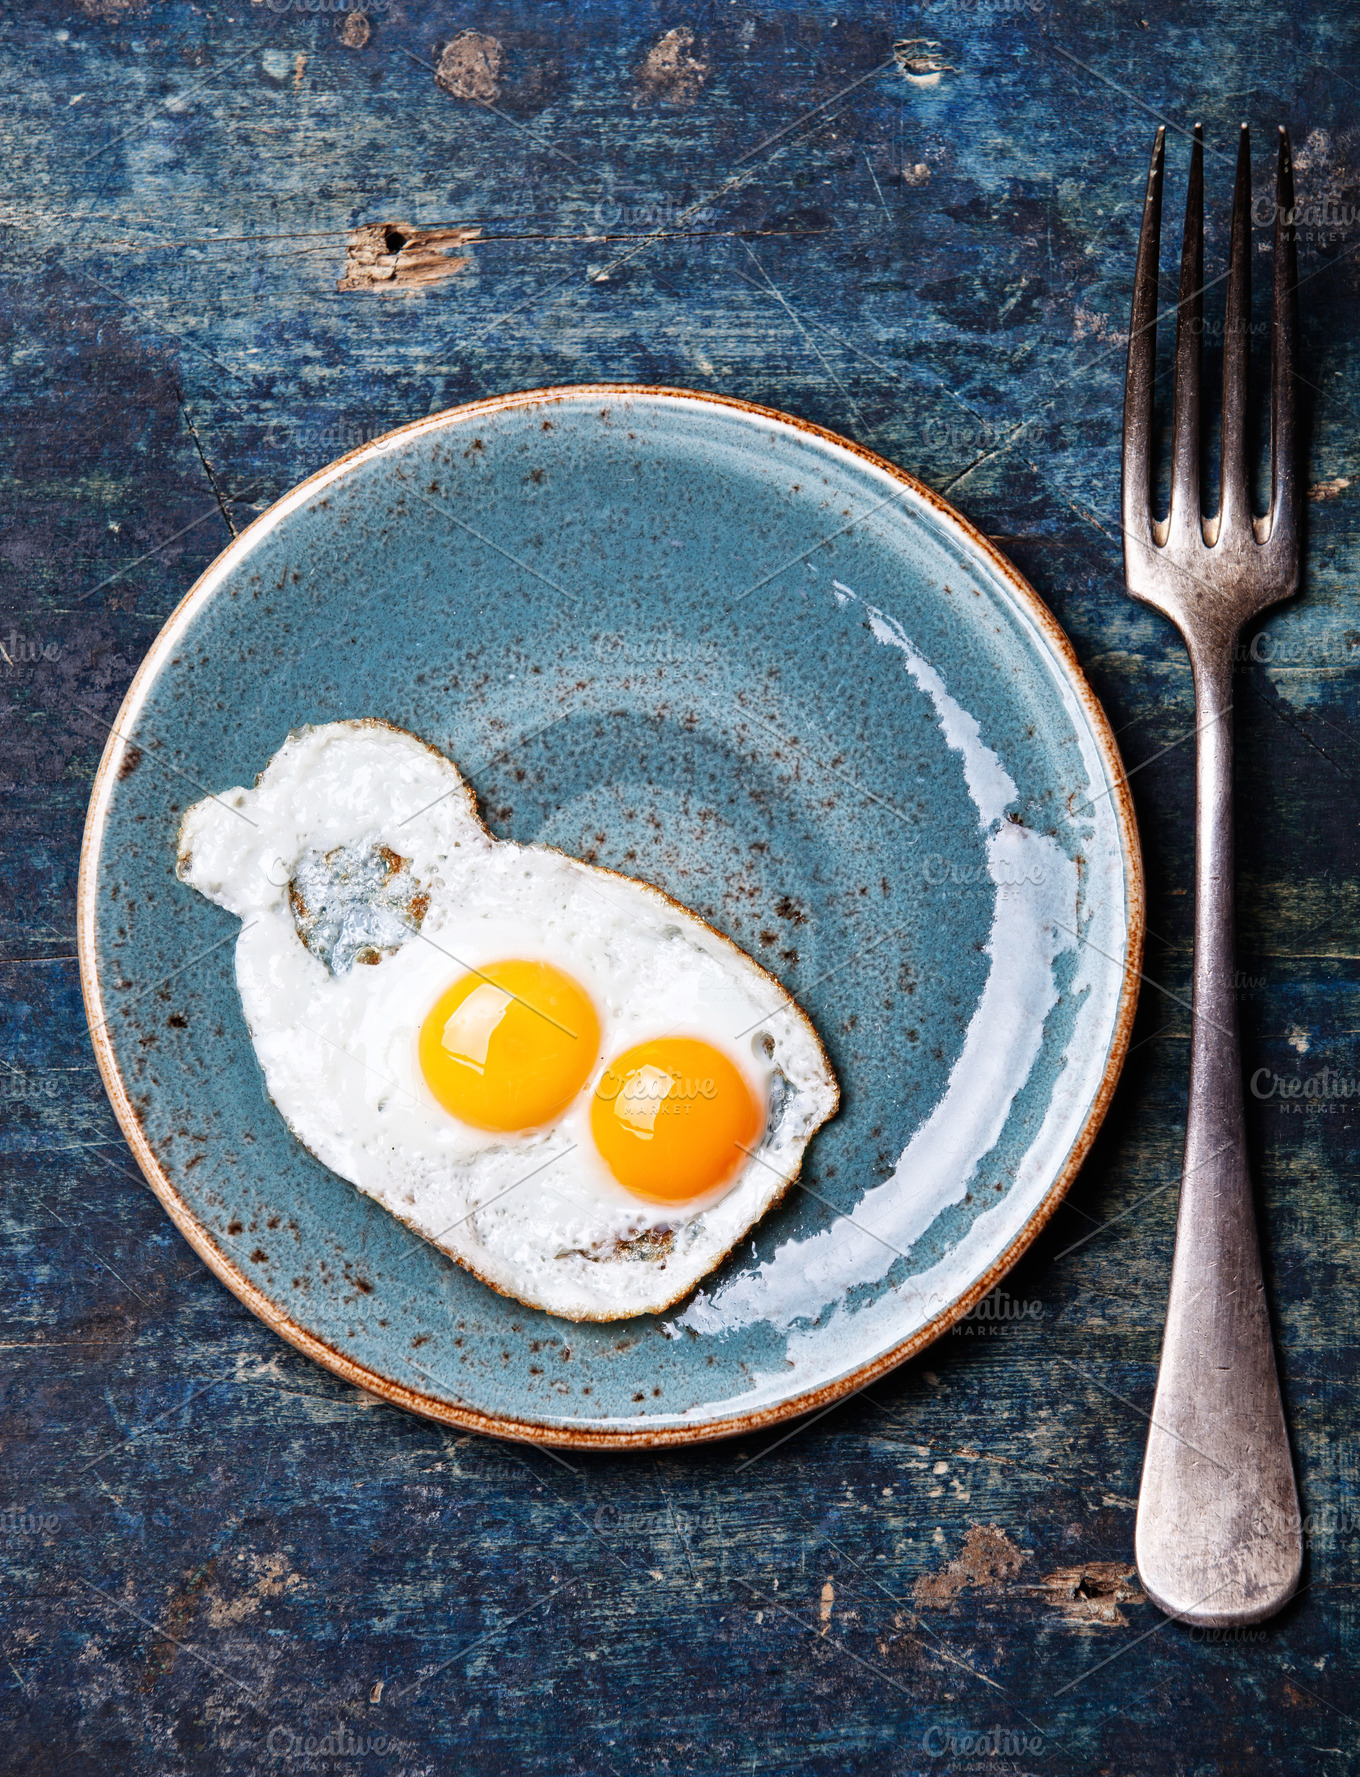 Traditional breakfast eggs | High-Quality Food Images ~ Creative Market